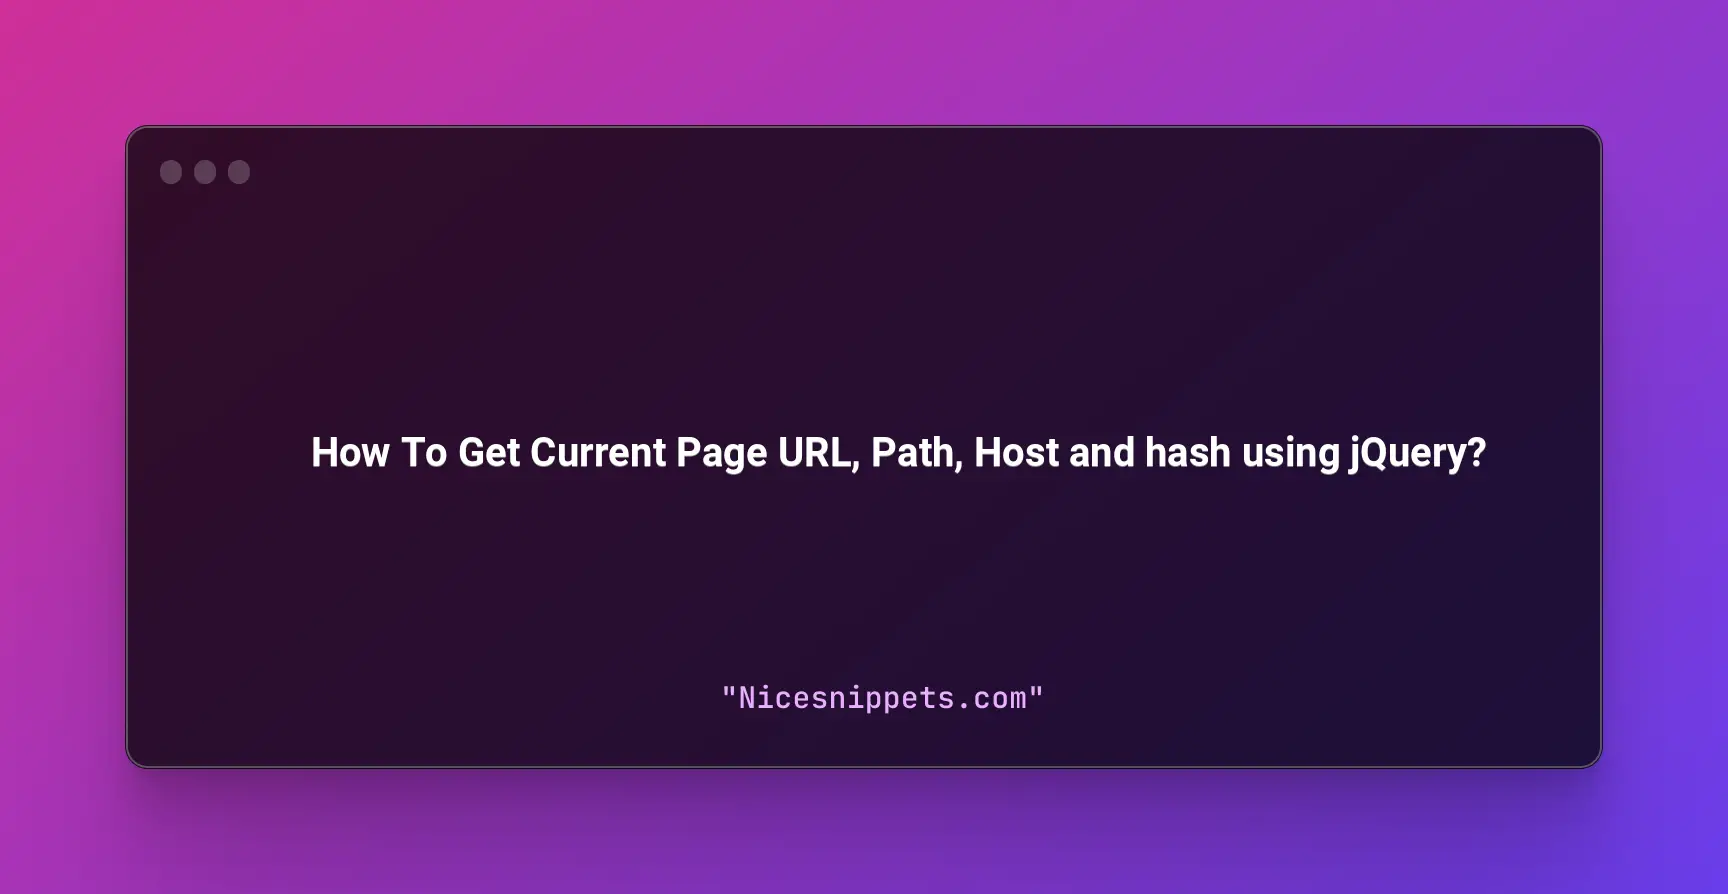 How To Get Current Page URL, Path, Host and hash using jQuery?